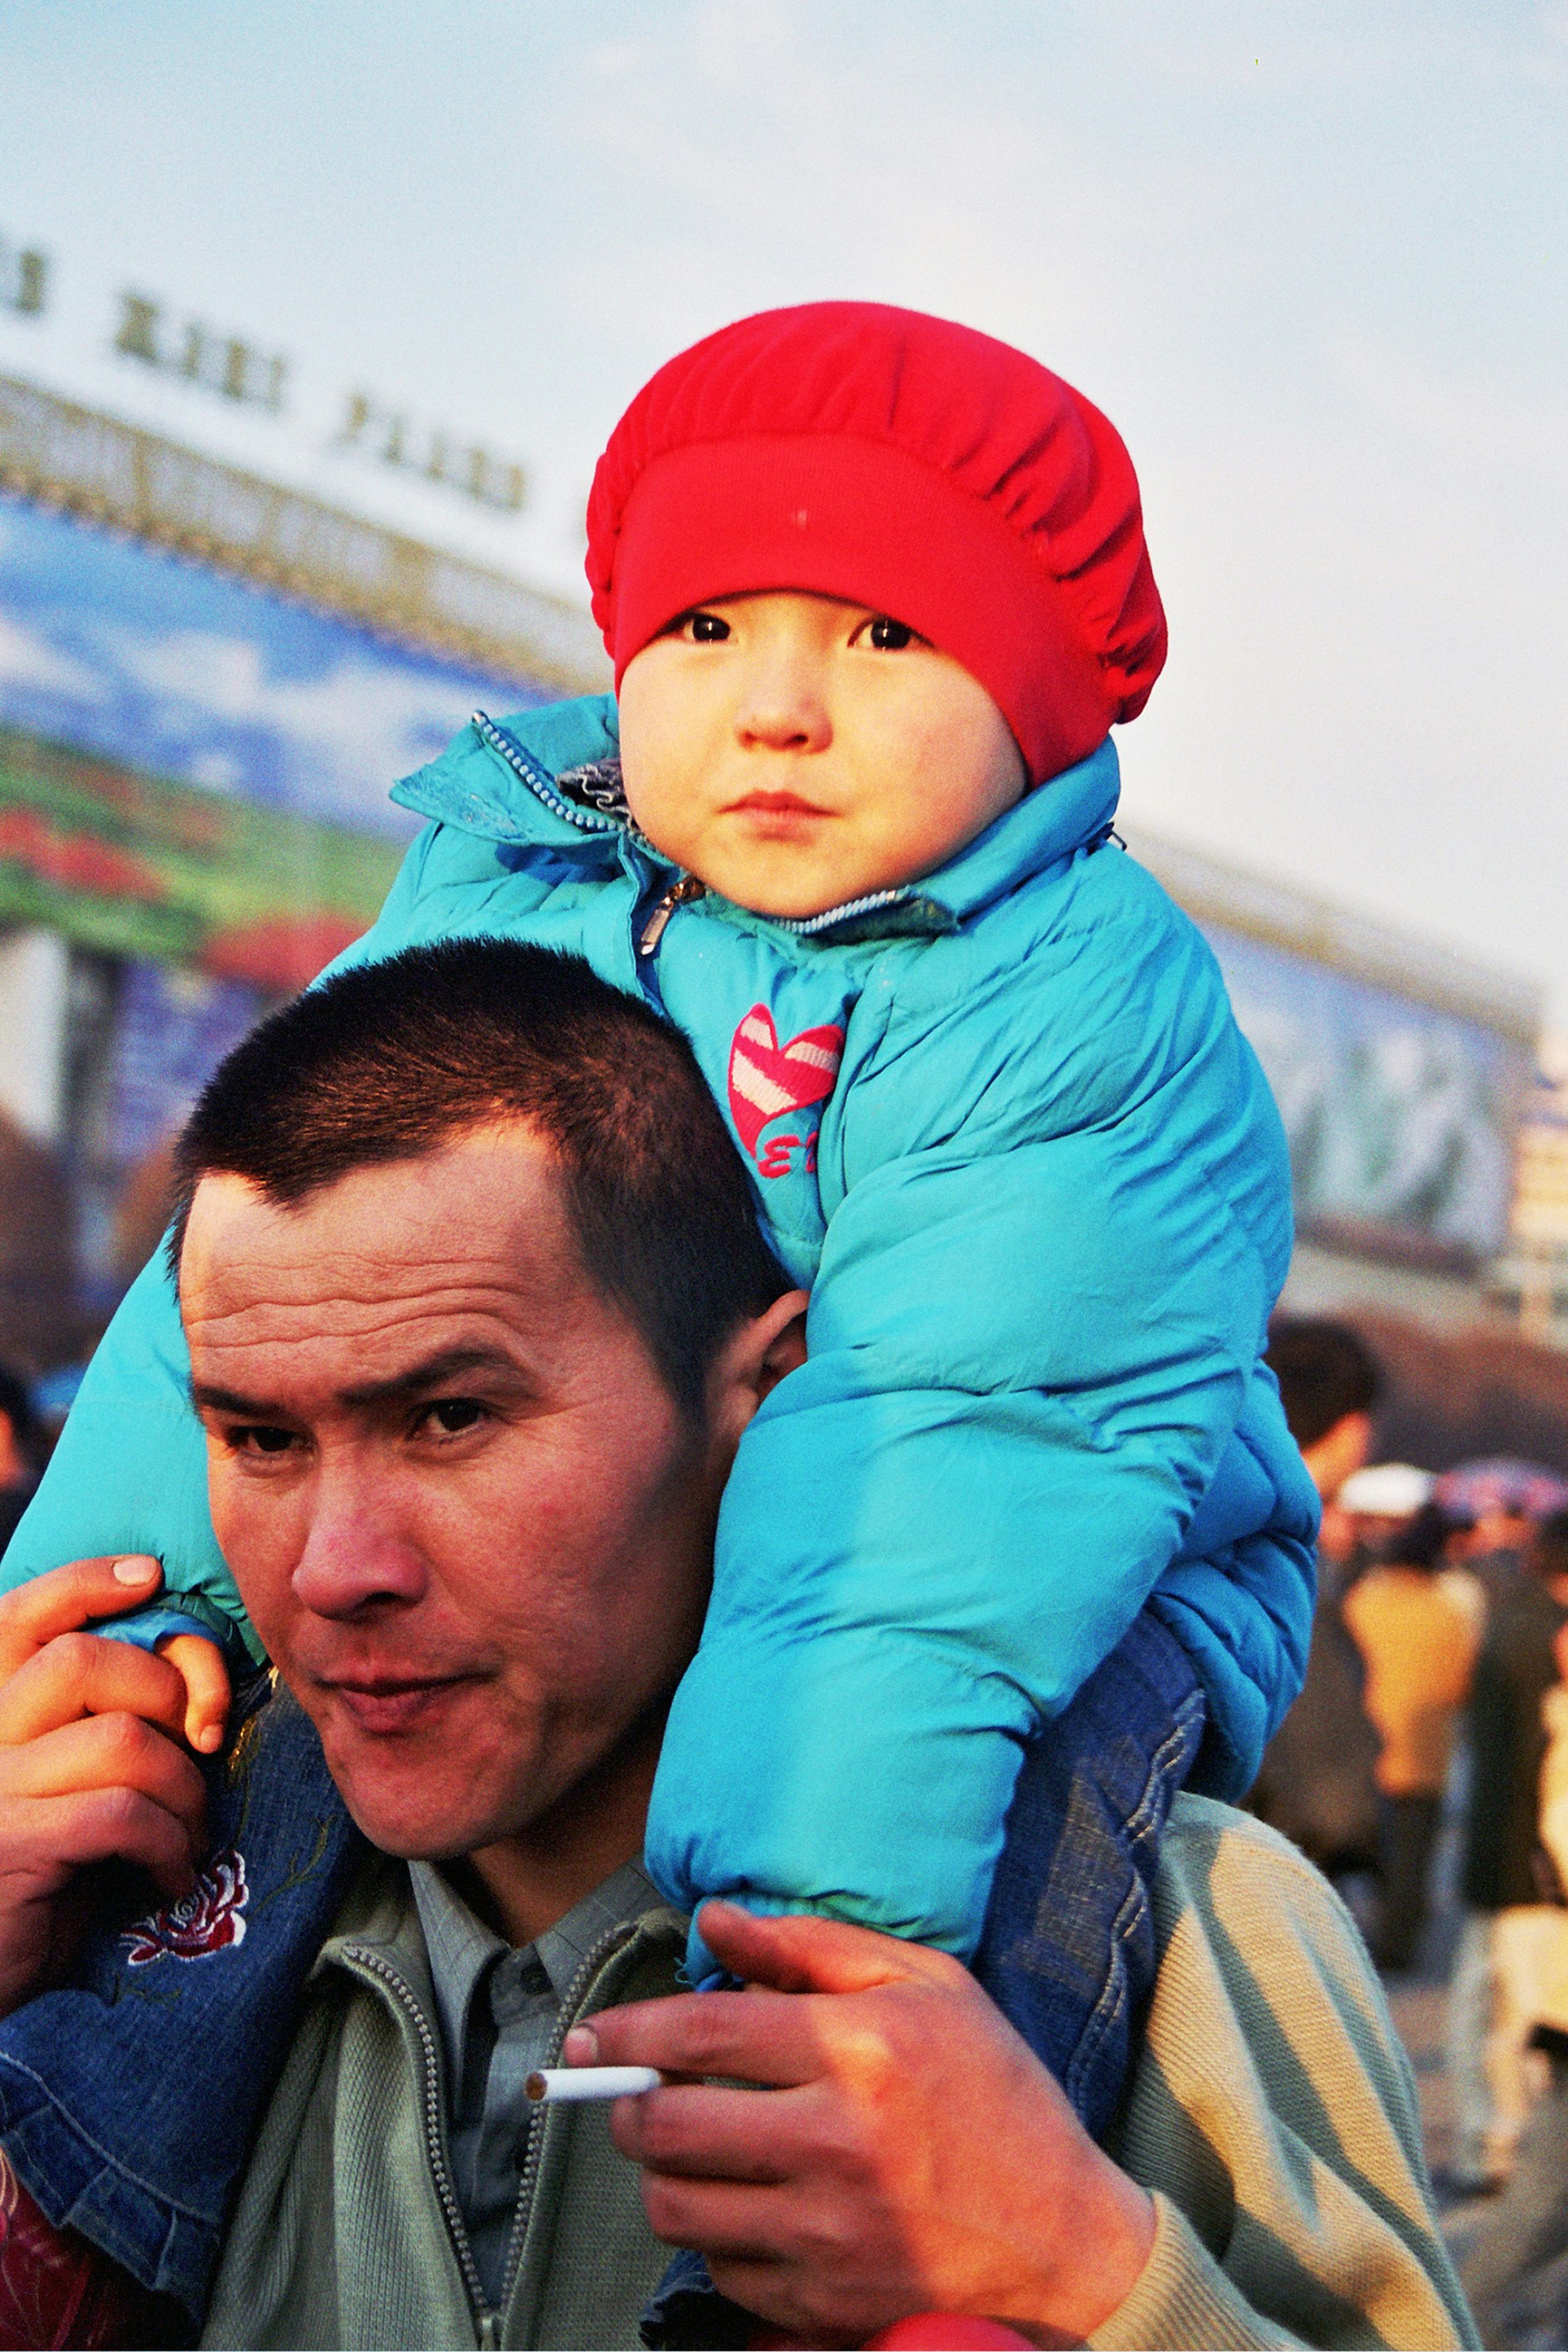 A small child in a blue jacket and a red hat on an adult's shoulders. The adult has a cigarette in their left hand and is holding the child's hand in their right.